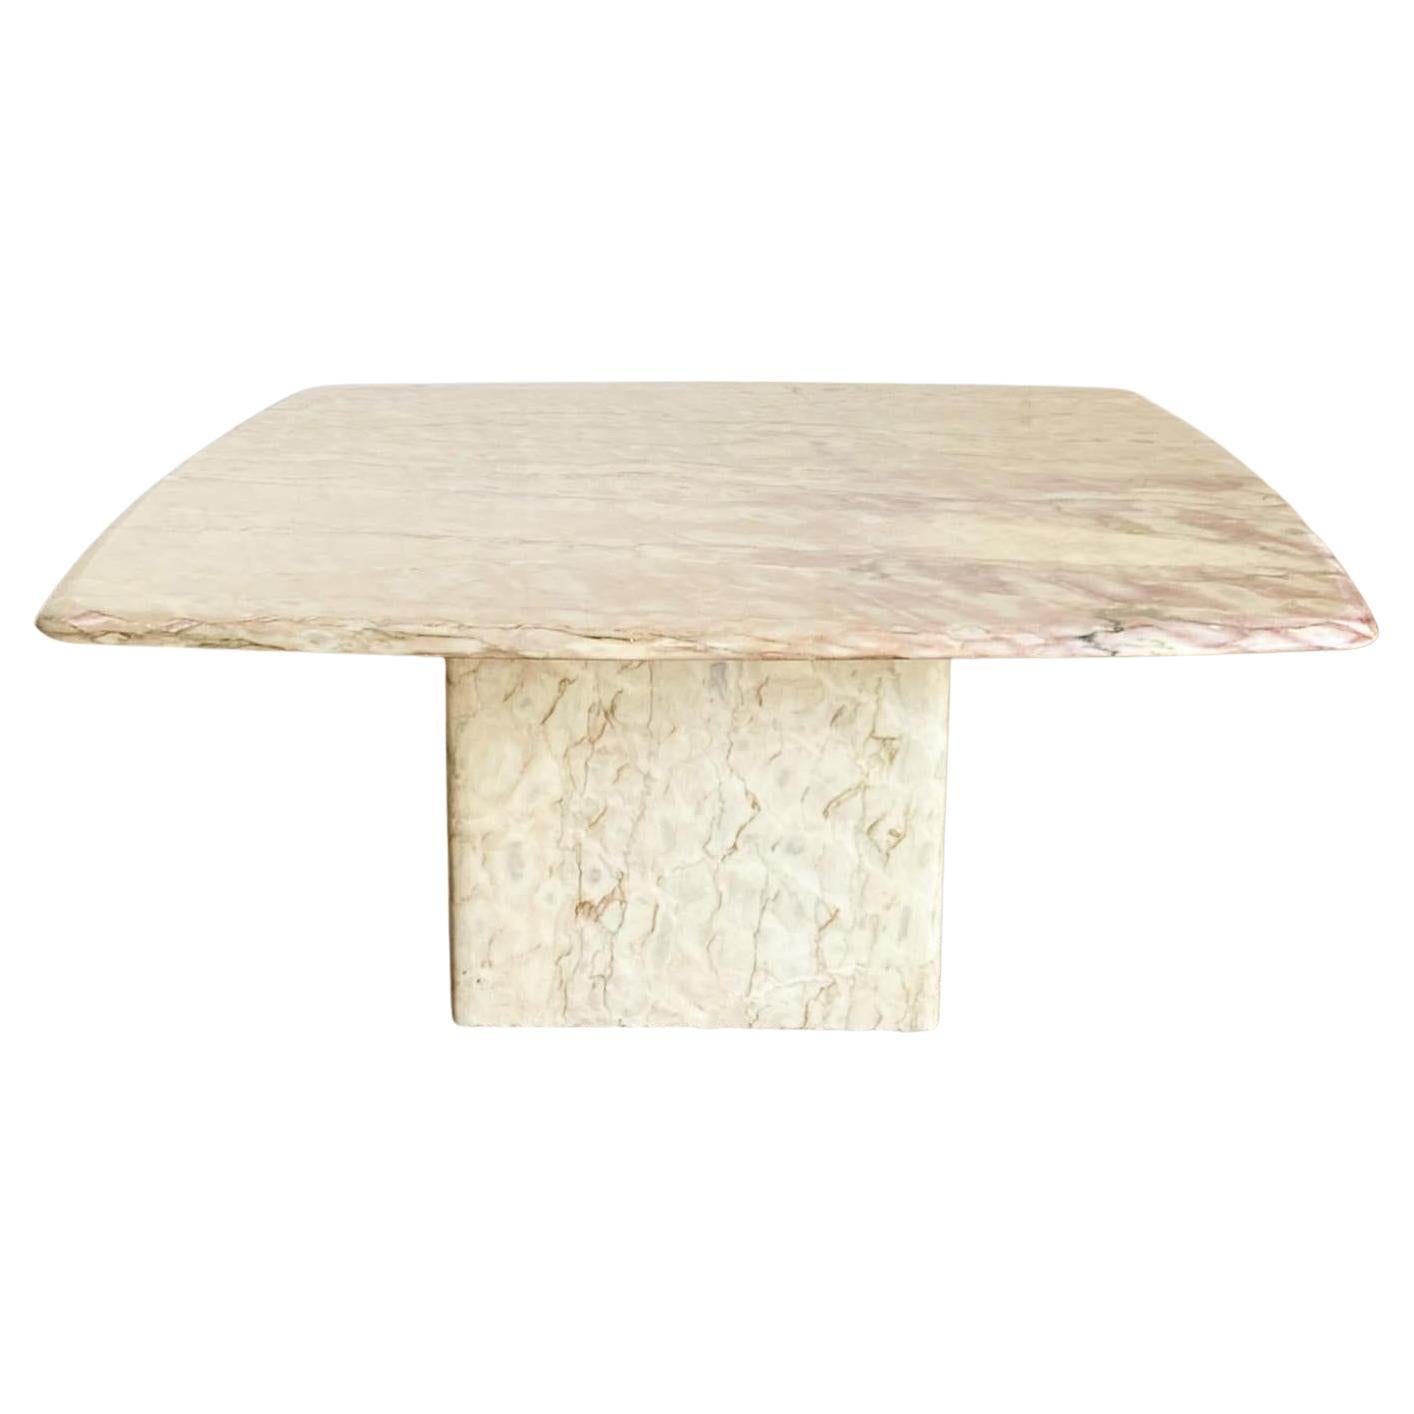 Cream and Pink Marble Rounded Square Top Coffee Table For Sale